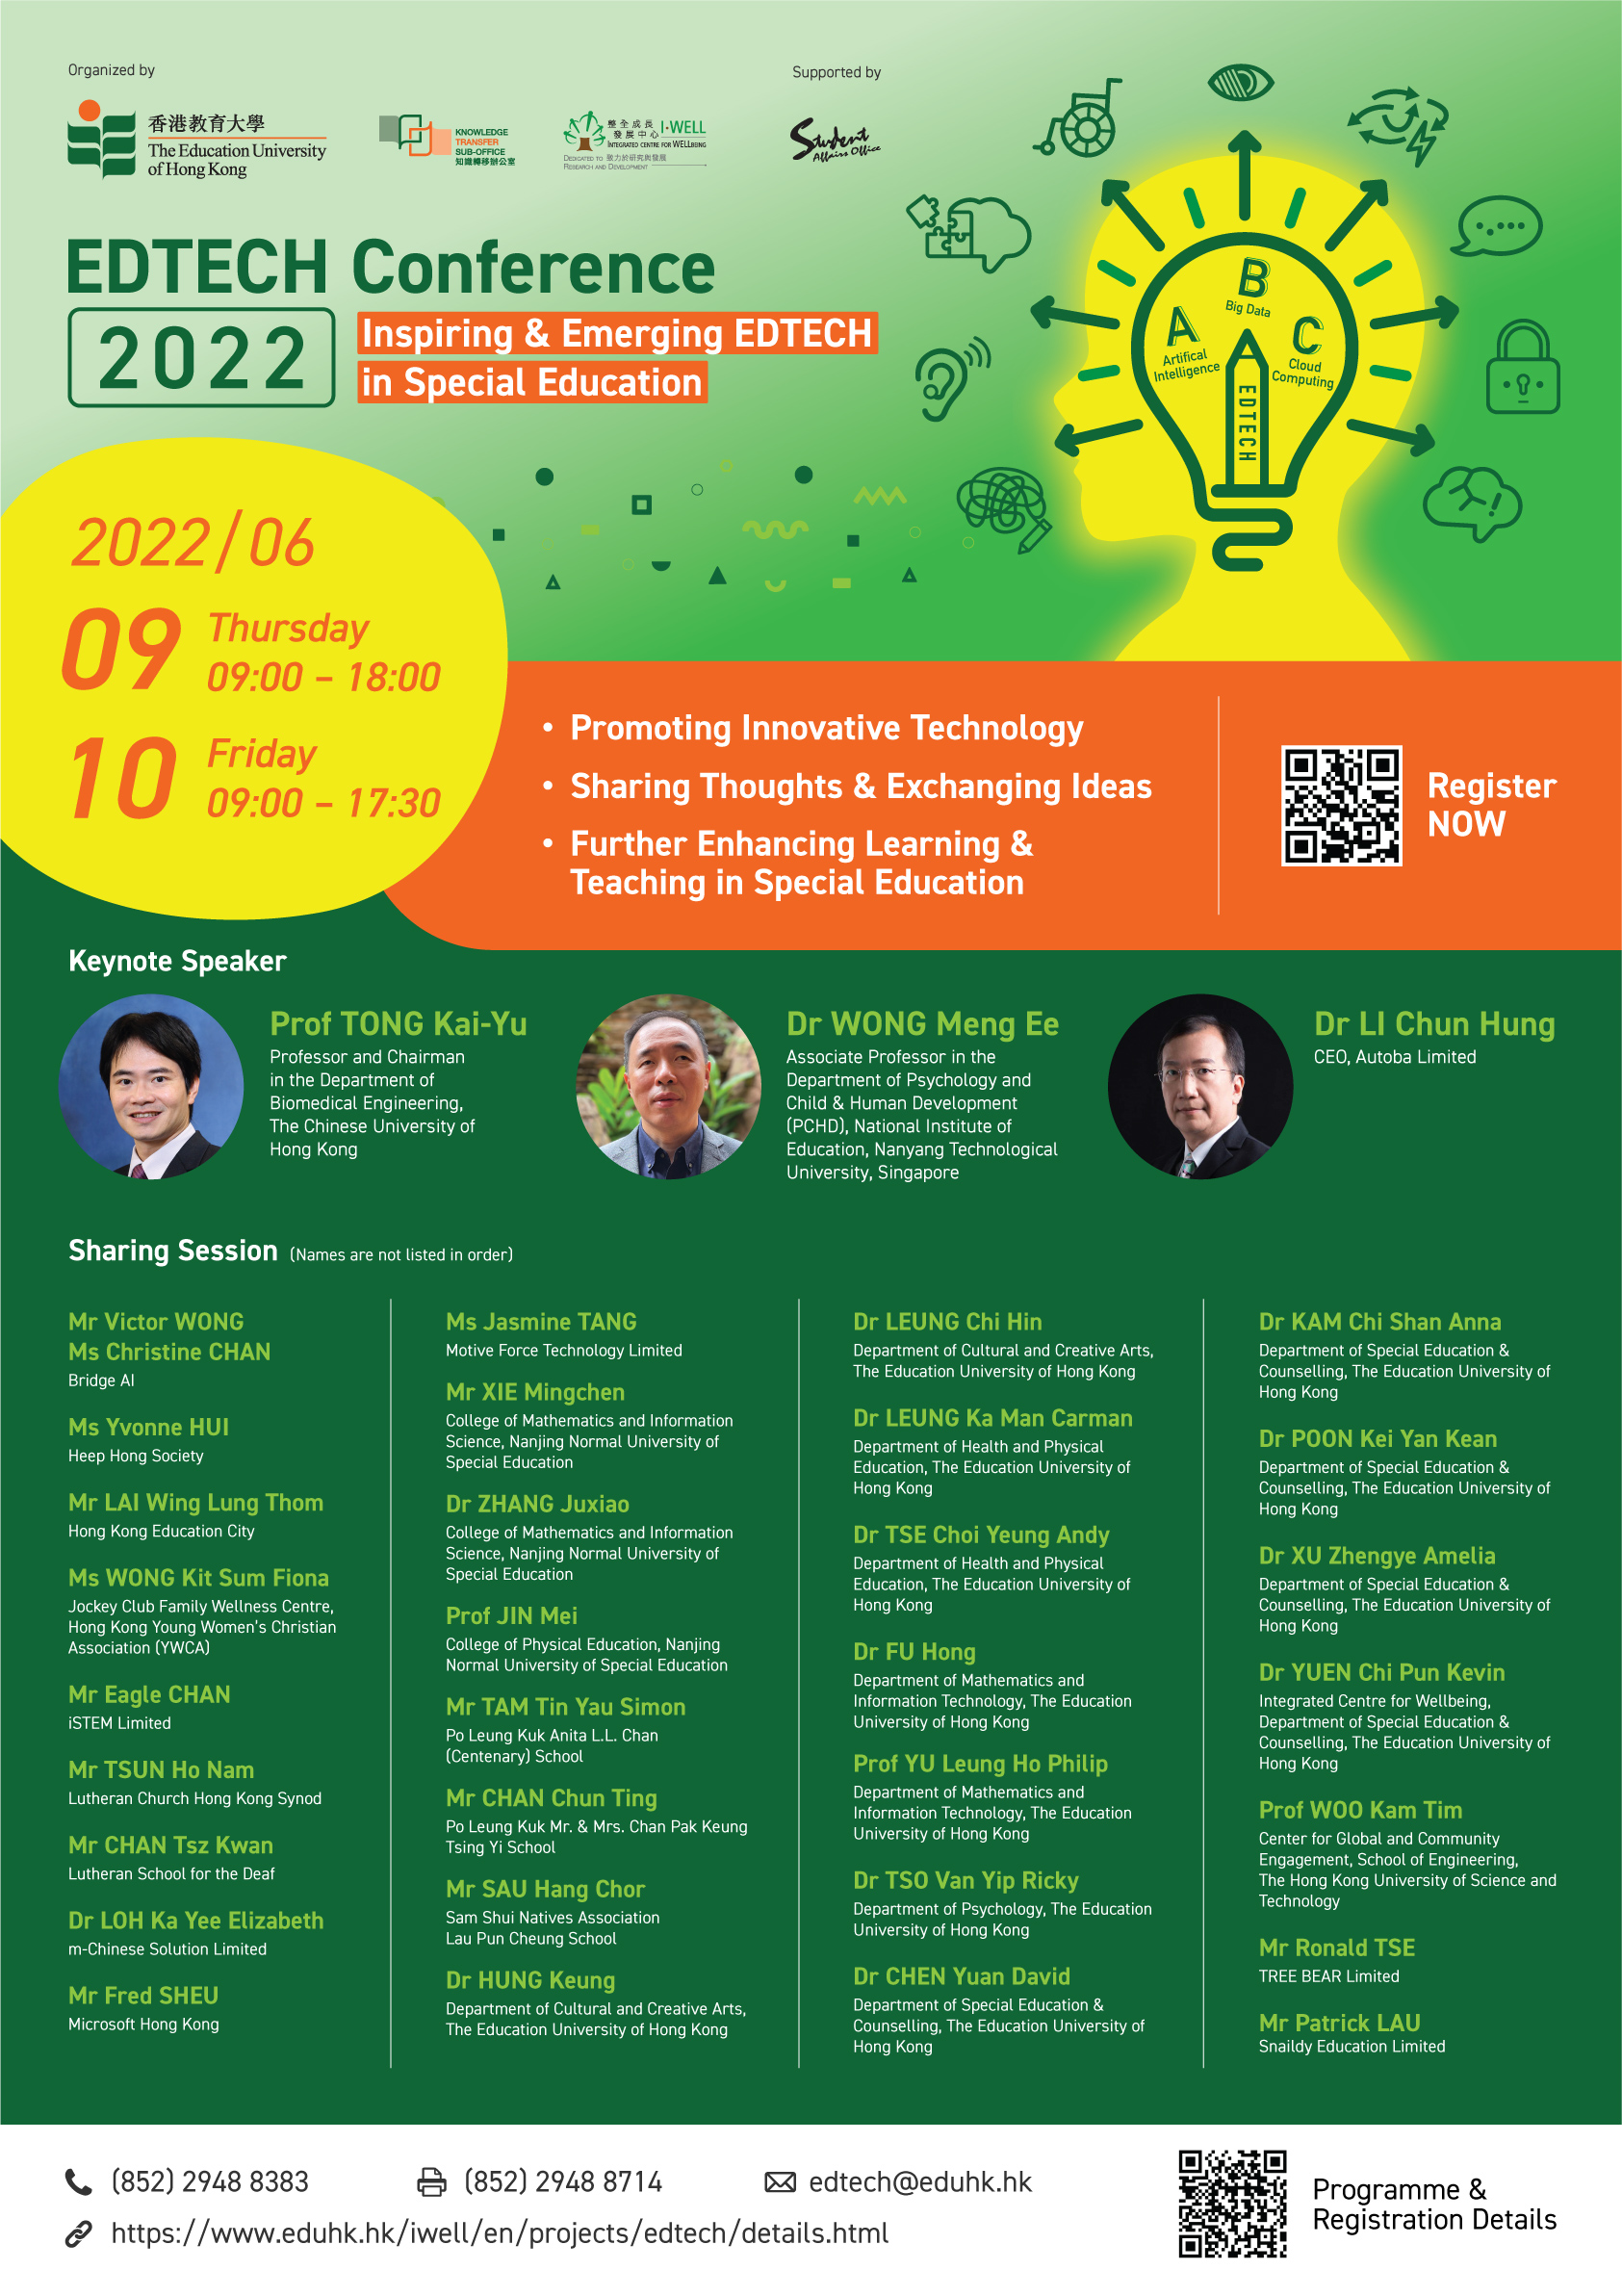 EDTECH Conference 2022 Poster.  Content same as text on this webpage.